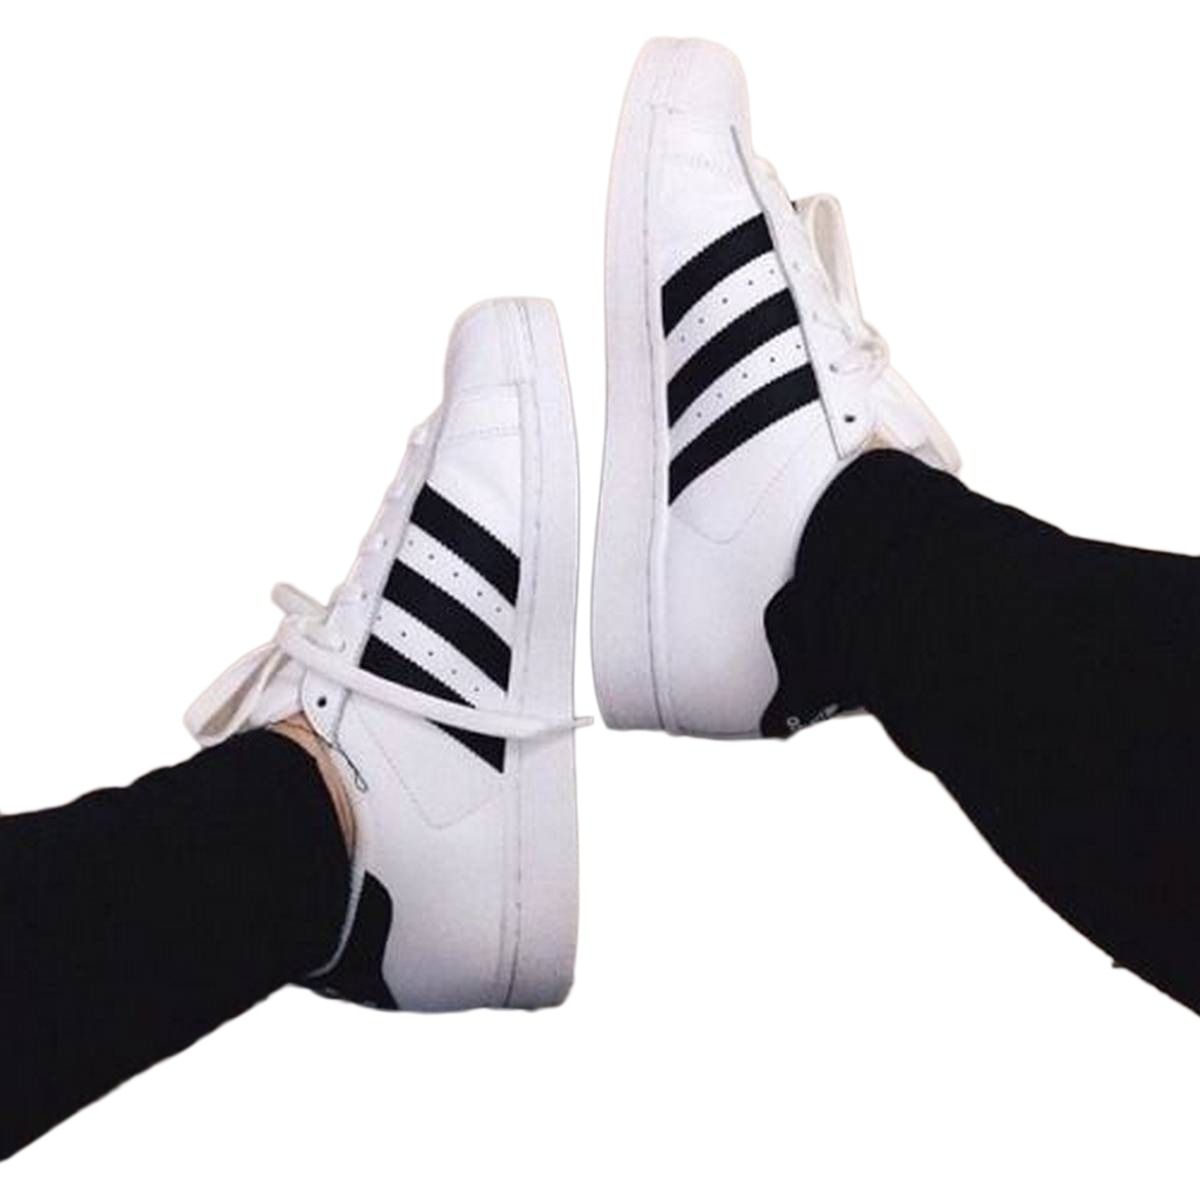 Buy WHITE CASUAL SHOES FOR at Lowest Price in Pakistan